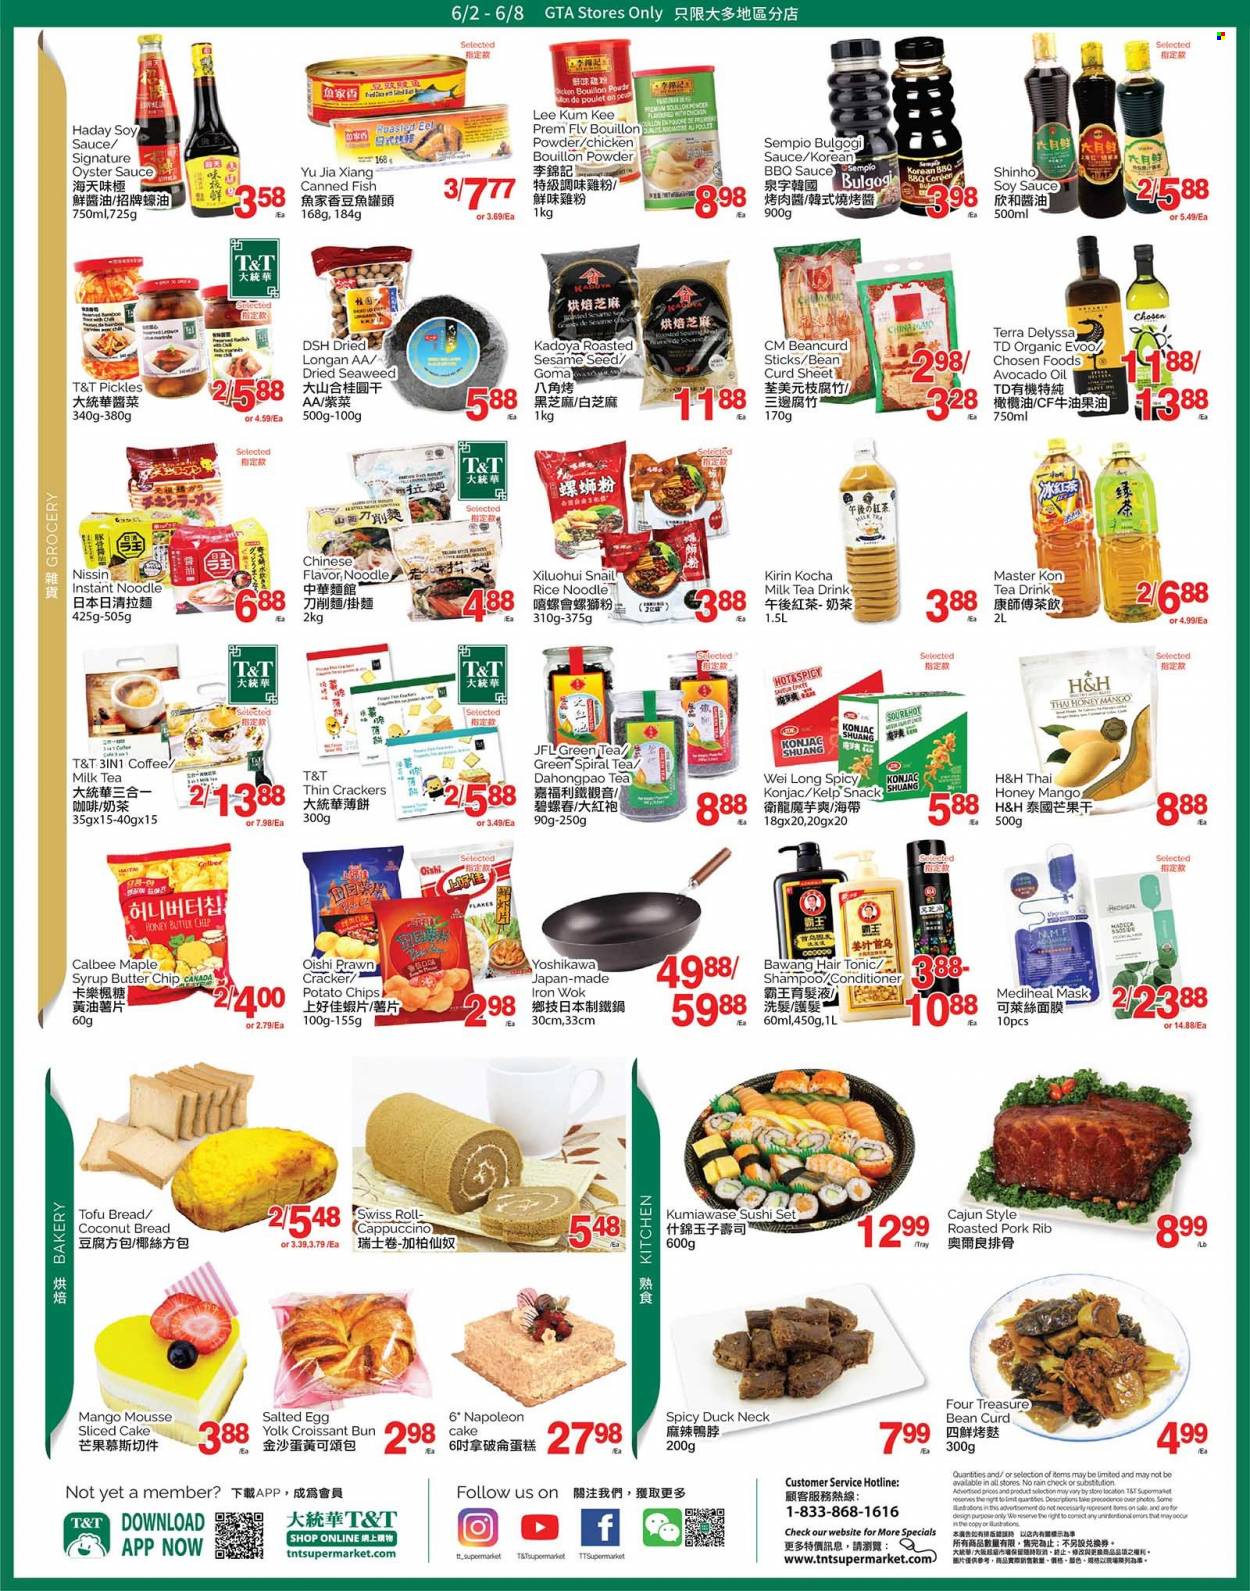 thumbnail - T&T Supermarket Flyer - June 02, 2023 - June 08, 2023 - Sales products - bread, cake, croissant, eel, oysters, prawns, fish, sushi, sauce, Nissin, snack, curd, tofu, milk, crackers, potato chips, chips, salted egg, bouillon, sesame seed, seaweed, pickles, canned fish, rice, BBQ sauce, soy sauce, oyster sauce, Lee Kum Kee, avocado oil, maple syrup, honey, syrup, green tea, tea, cappuccino, coffee, chicken, ribs, shampoo, conditioner, tong, wok, pin. Page 3.